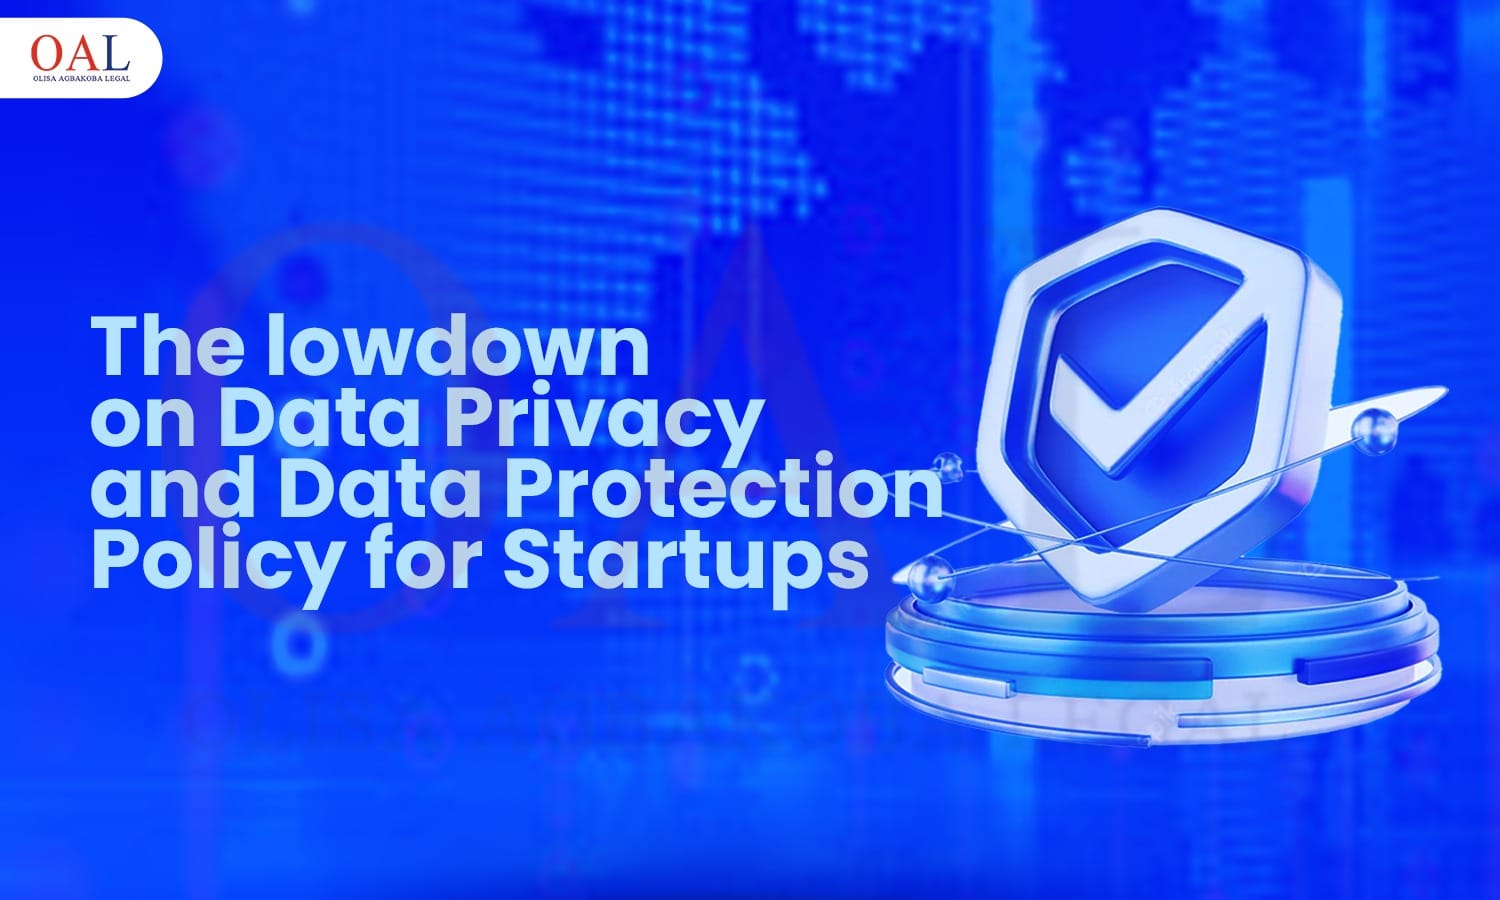 The lowdown on Data Privacy and Data Protection Policy for Startups by Olisa Agbakoba Legal (OAL)